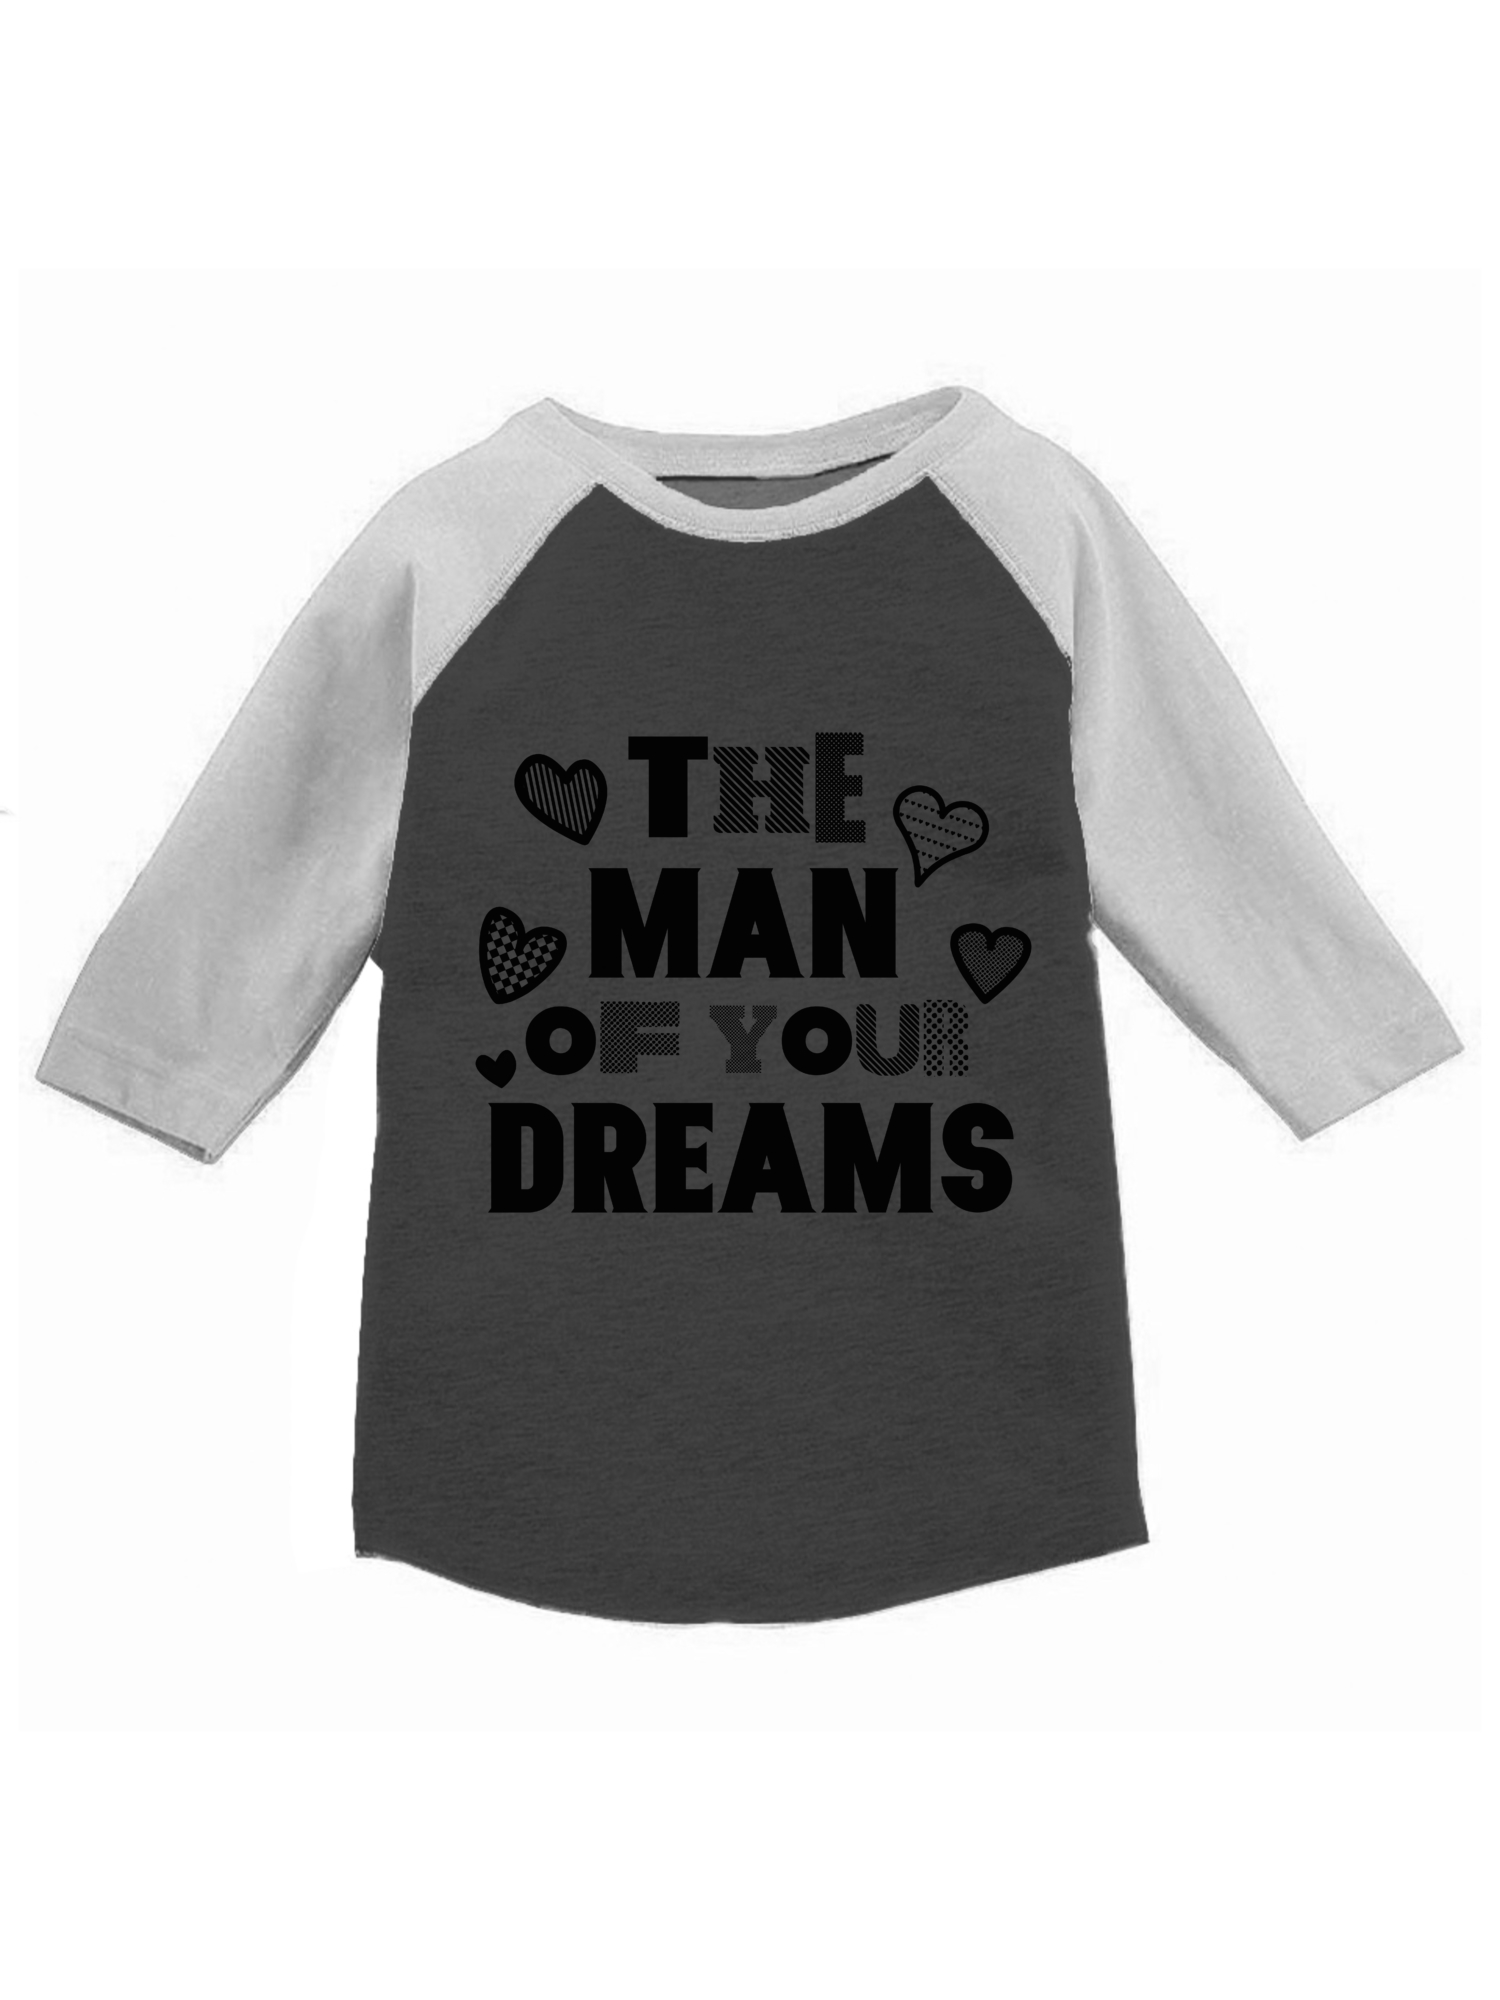 Awkward Styles The Man Of Your Dreams Toddler Raglan Boys Valentine Shirt Valentines Tshirt for Boys Valentine's Day Jersey Shirt Cute Gifts for Boys Mom Raglan Shirt for Toddler Boys Ladies Men Shirt - image 1 of 4